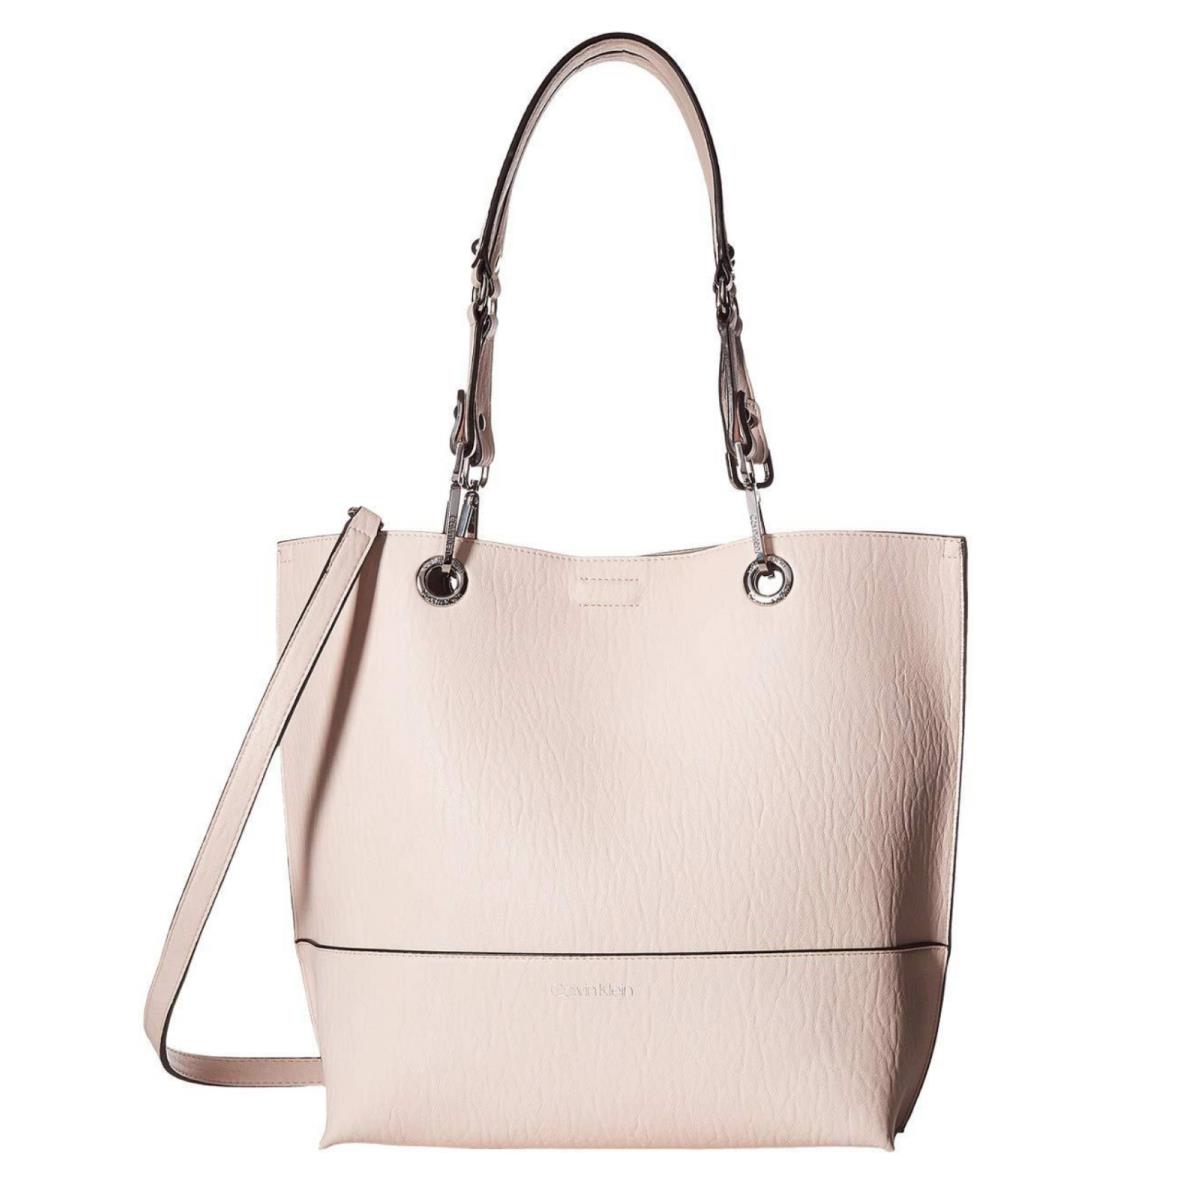 Calvin Klein Sonoma Reversible Tote with Pouch in Powder Pink/wheat/silver